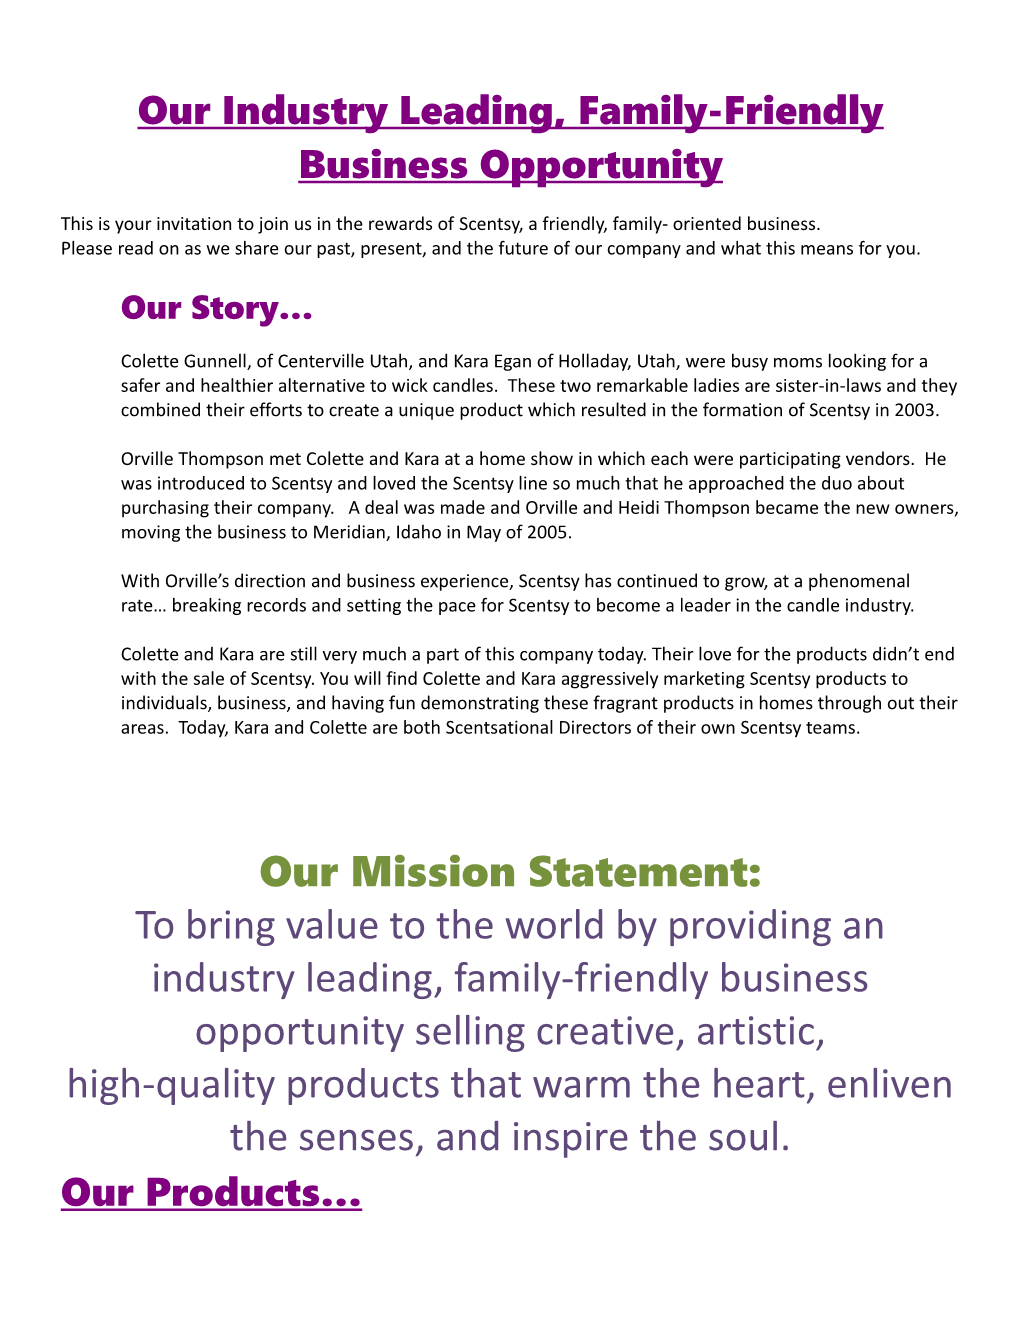 Our Industry Leading, Family-Friendly Business Opportunity